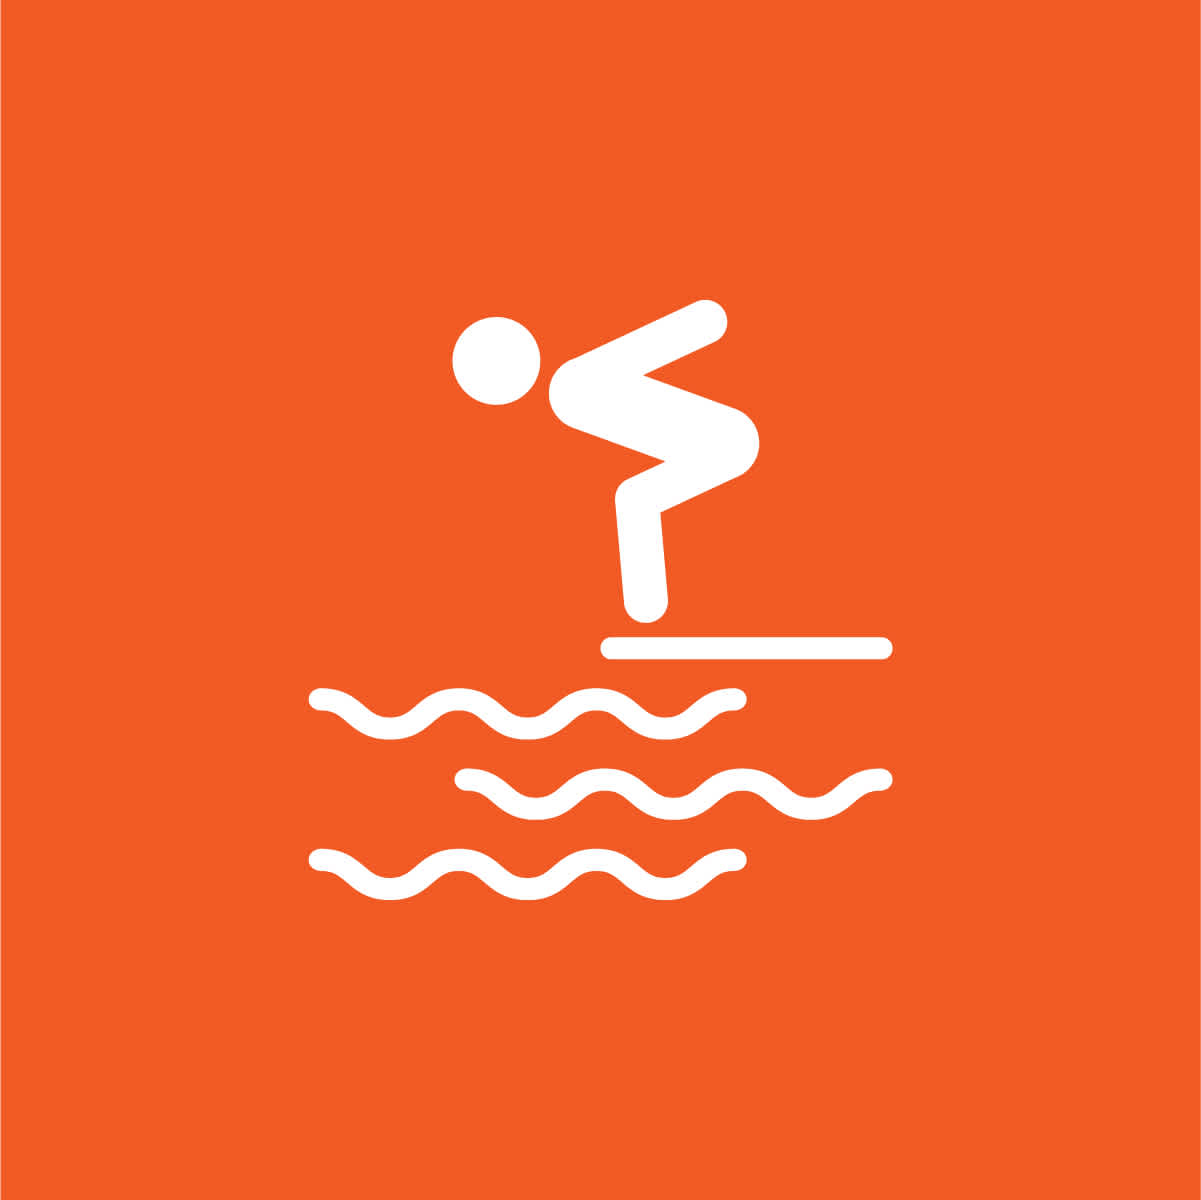 Dive into Inbound Marketing with Watermark - illustration of a person diving into water